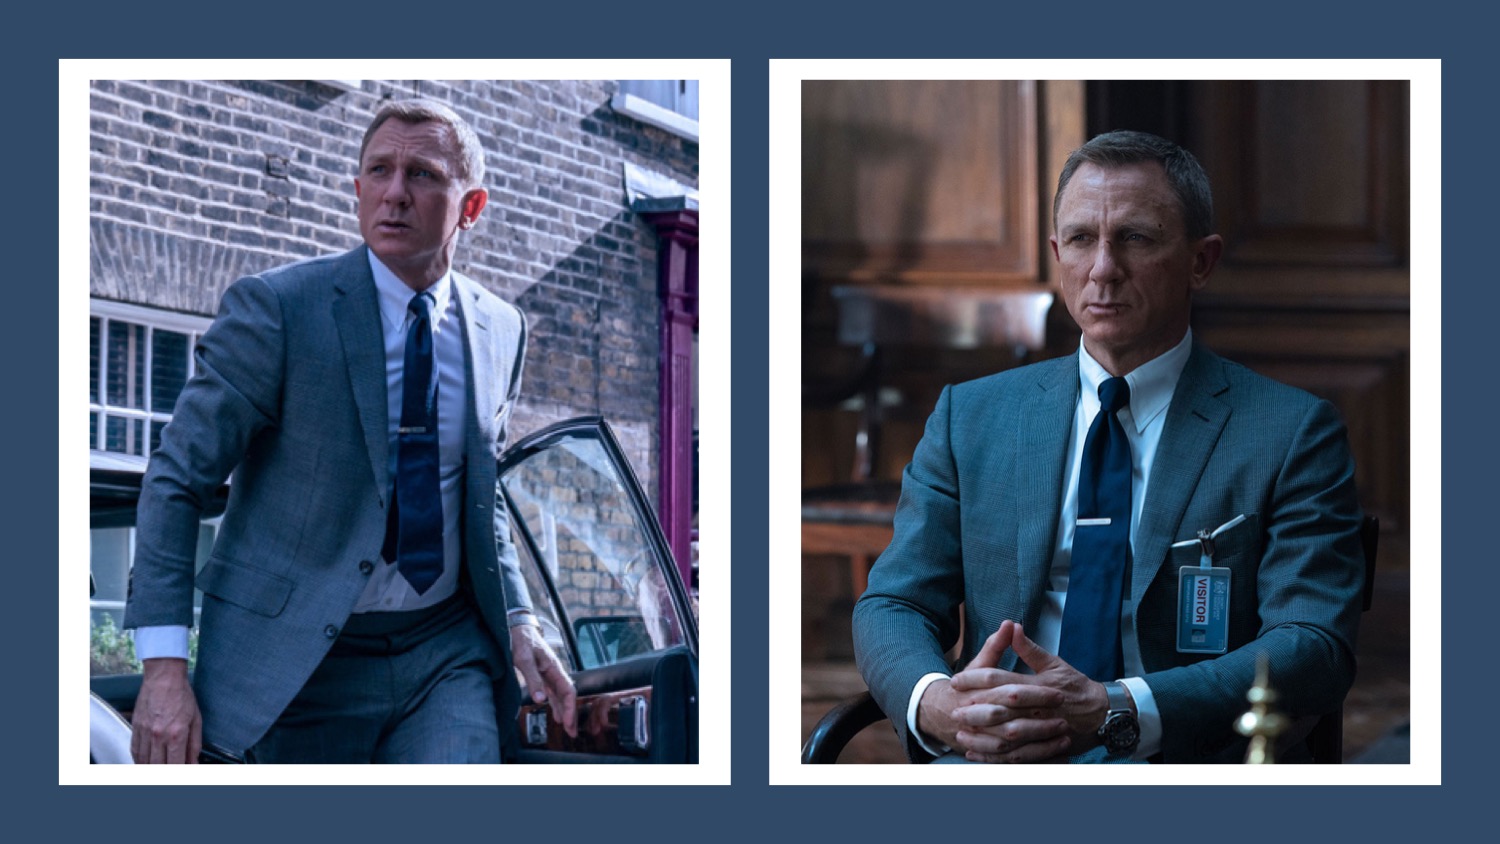 No Time To Die Tom Ford Ties: Six of the Best | Speculation & Review